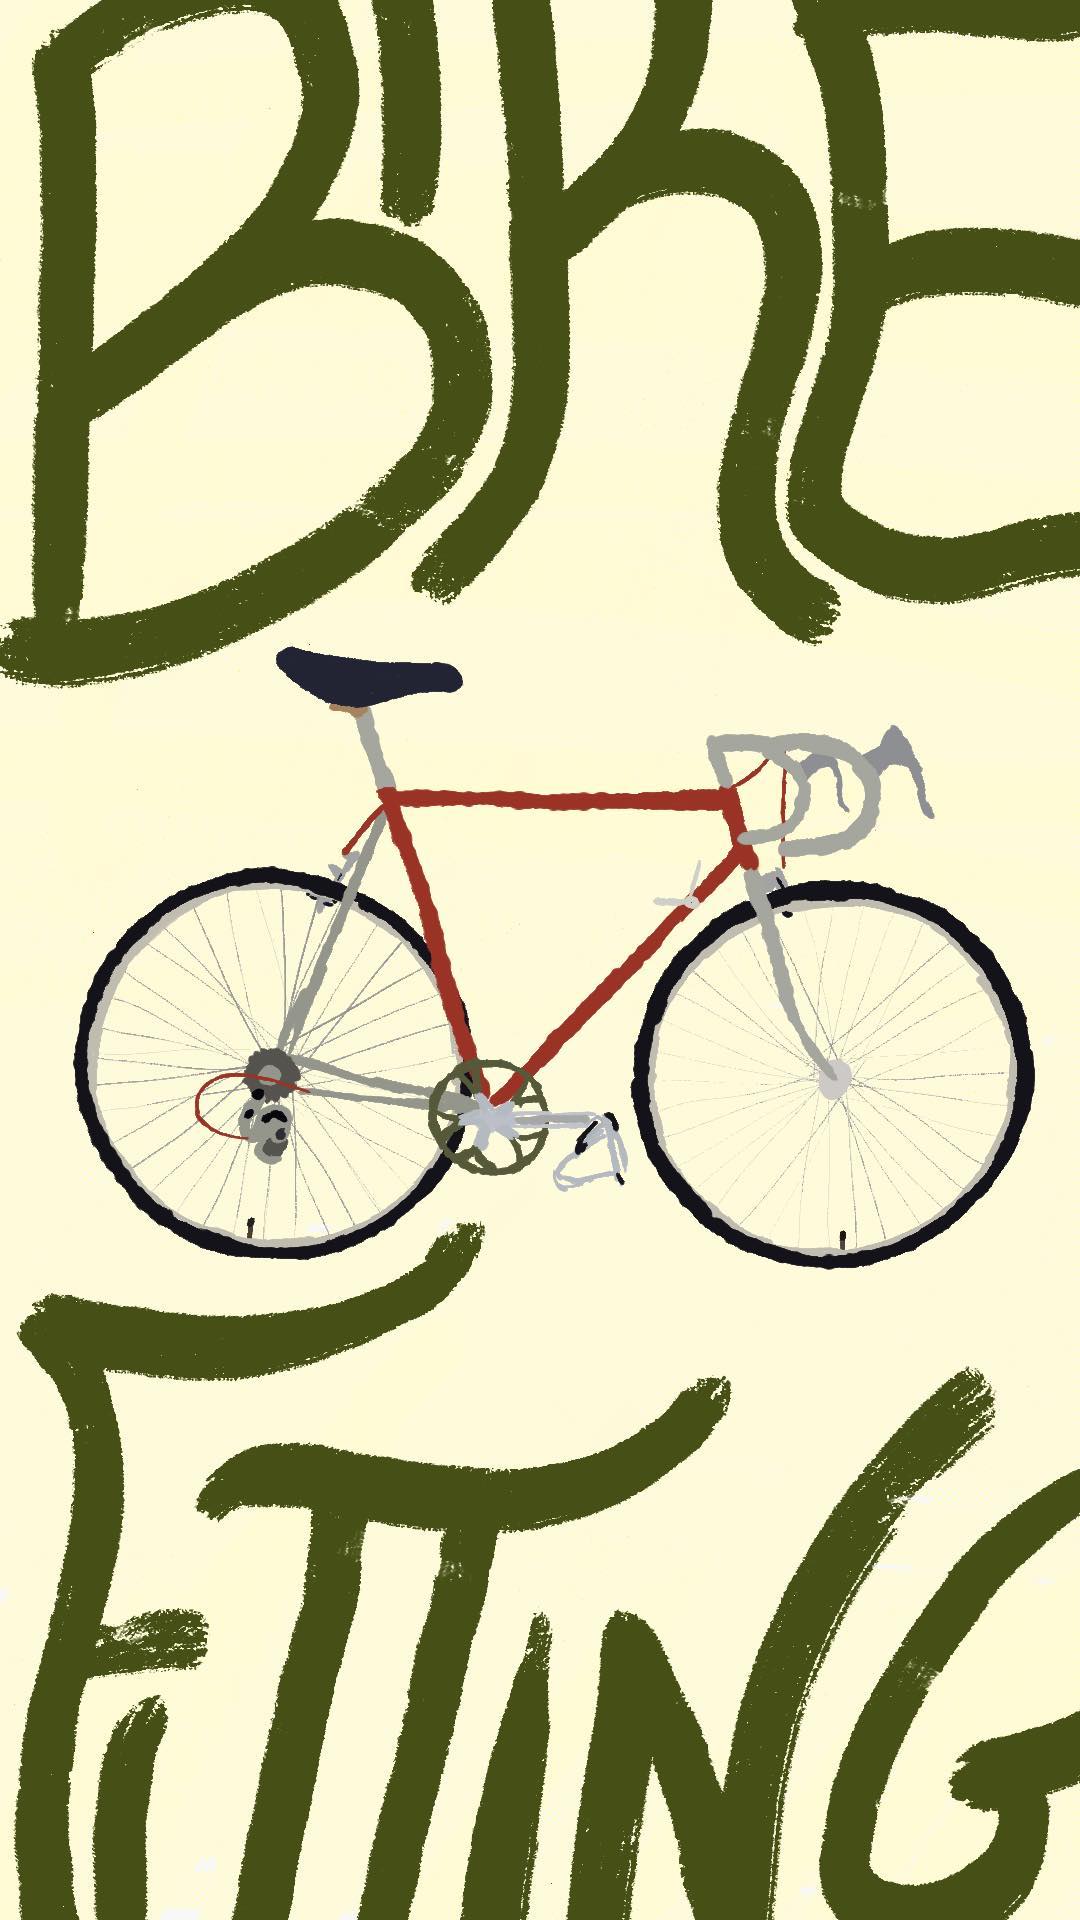 A 9:16 illustration of a red bike topped and bottomed by green handwritten text saying 'bike fitting'